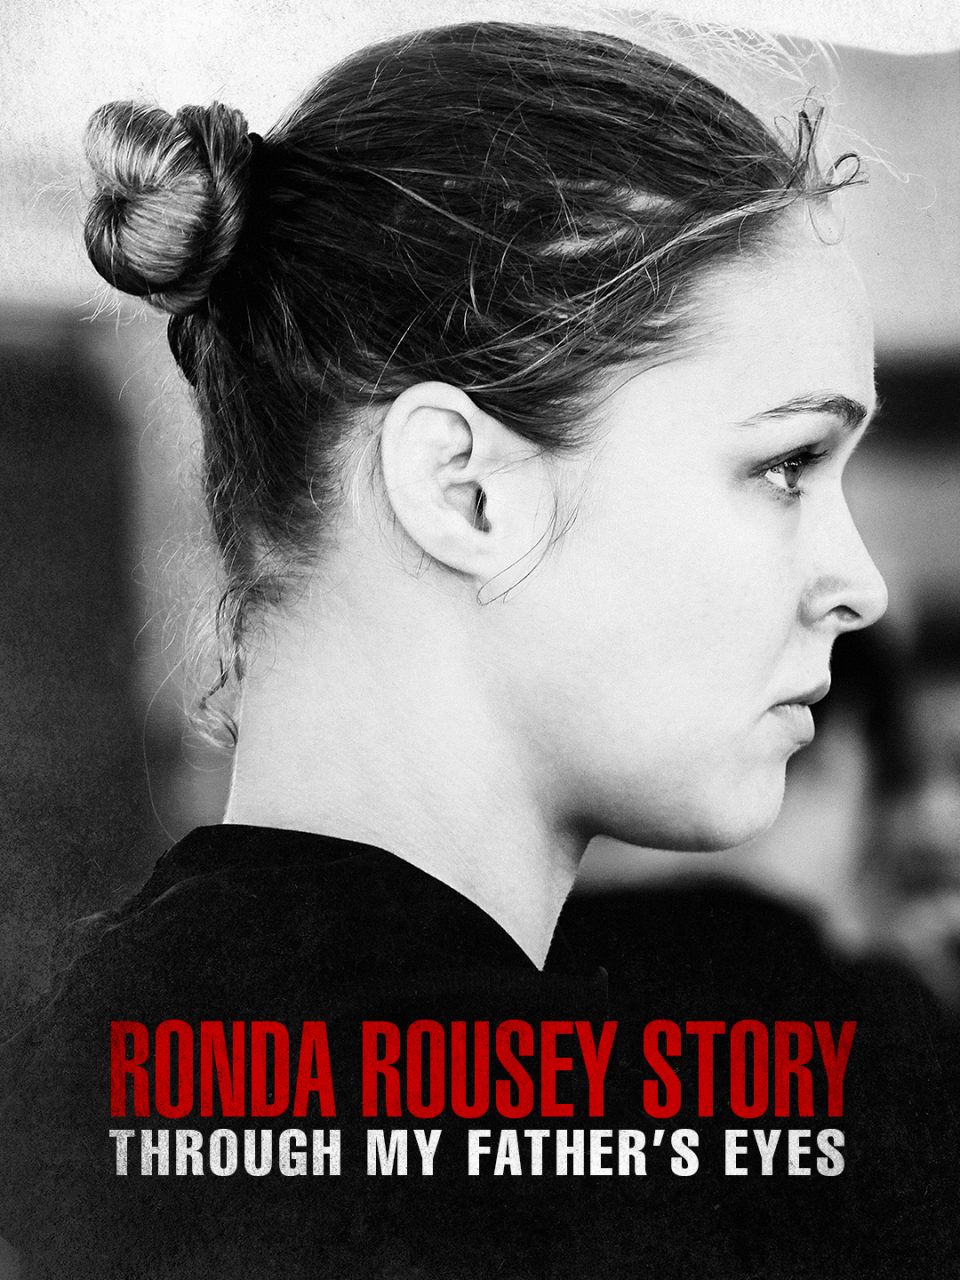 Ronda Rousey Story: Through My Father's Eyes Digital cover (Lionsgate Home Entertainment)